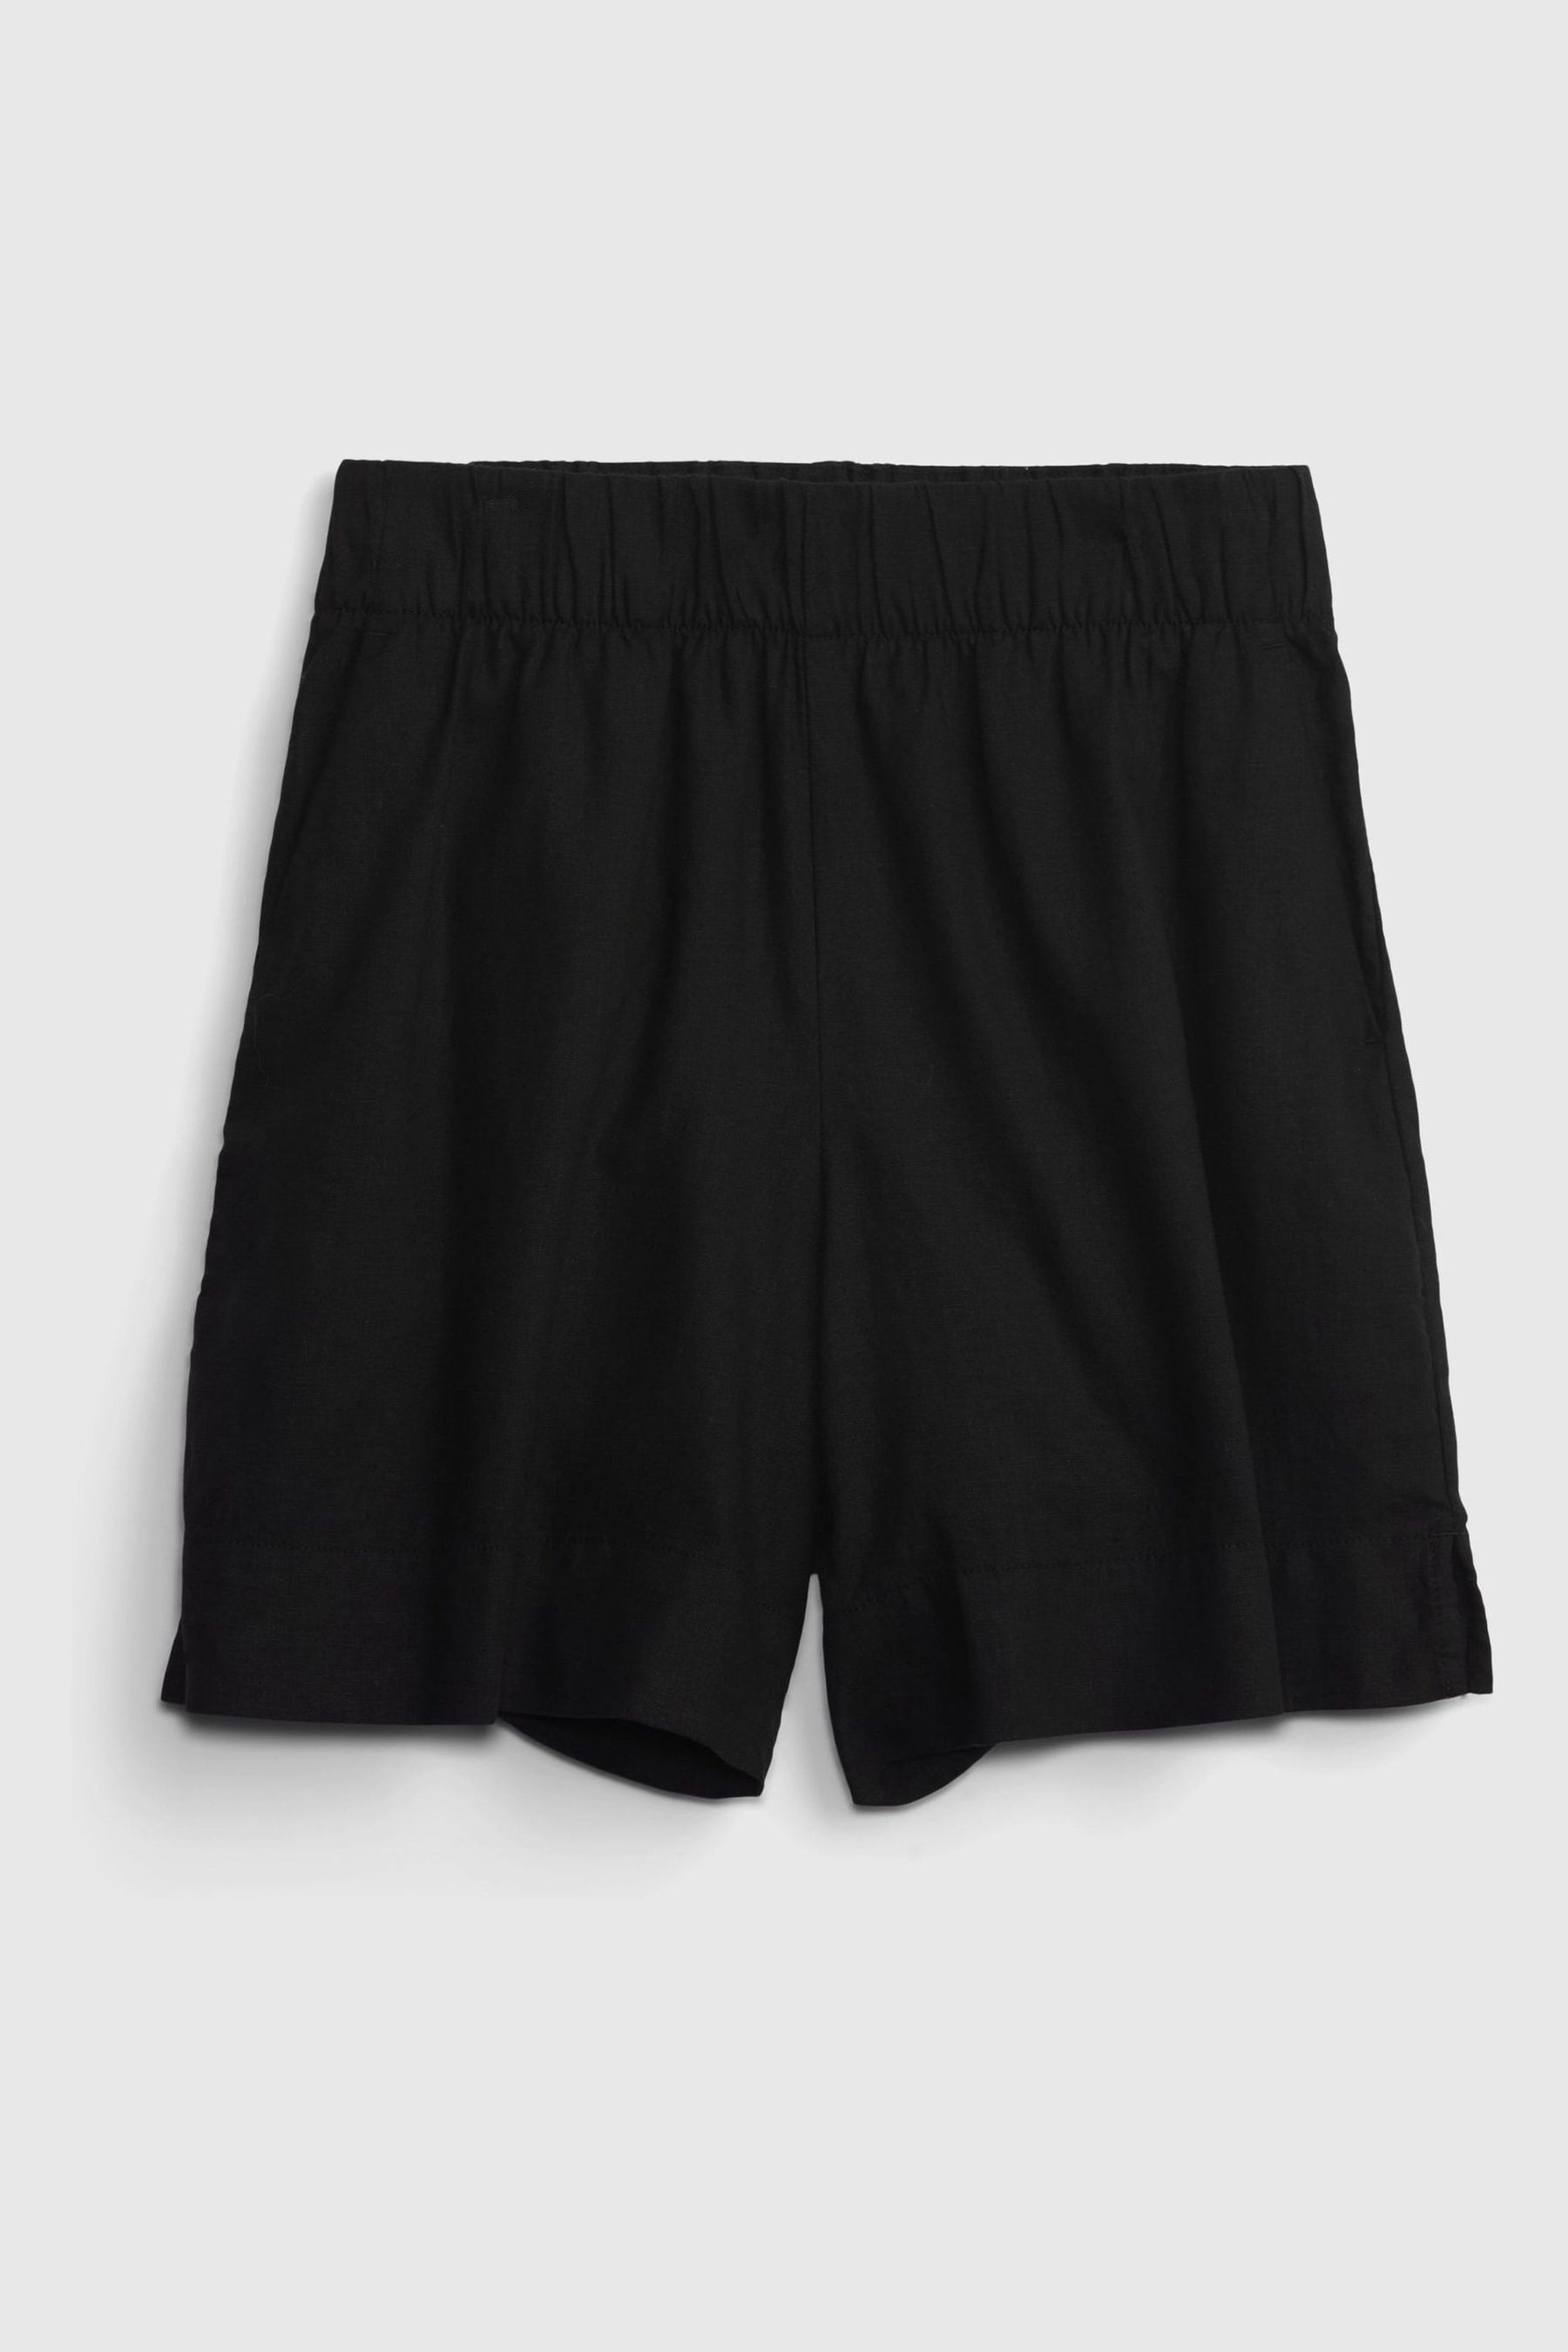 Buy Black Linen Blend Pull-On Loose Shorts from the Gap online shop